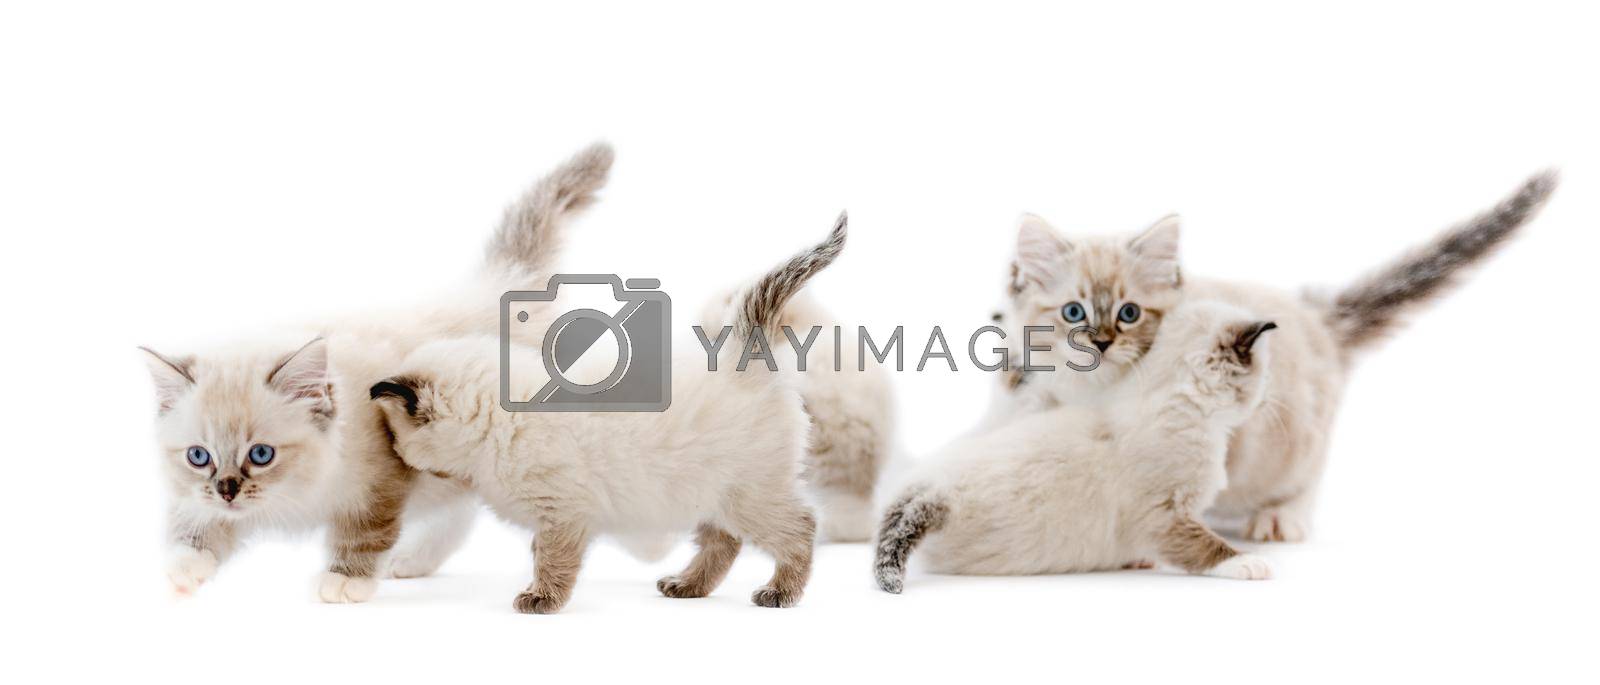 Ragdoll kittens isolated on white background with copyspace. Domestic fluffy purebred kitty pets studio portrait